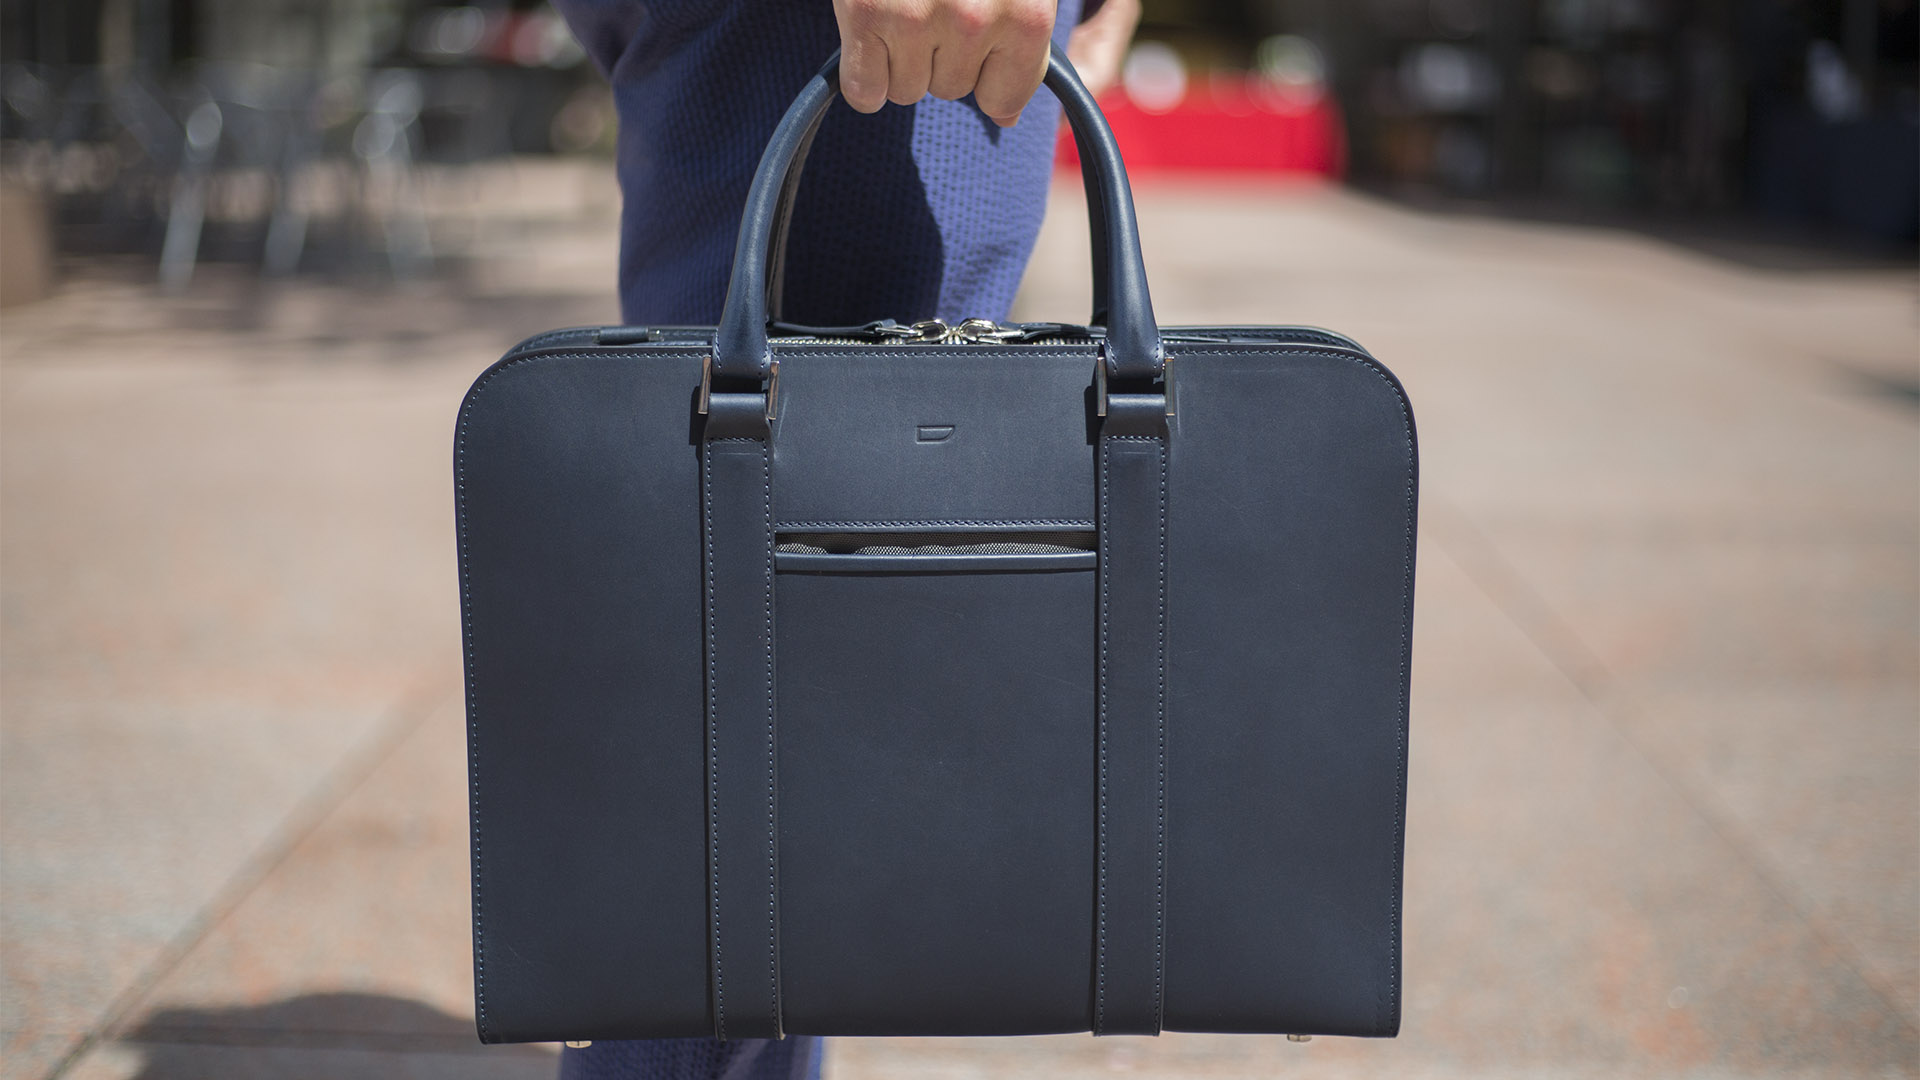 The Carl Friedrik Bag Review - The Fine Young Gentleman